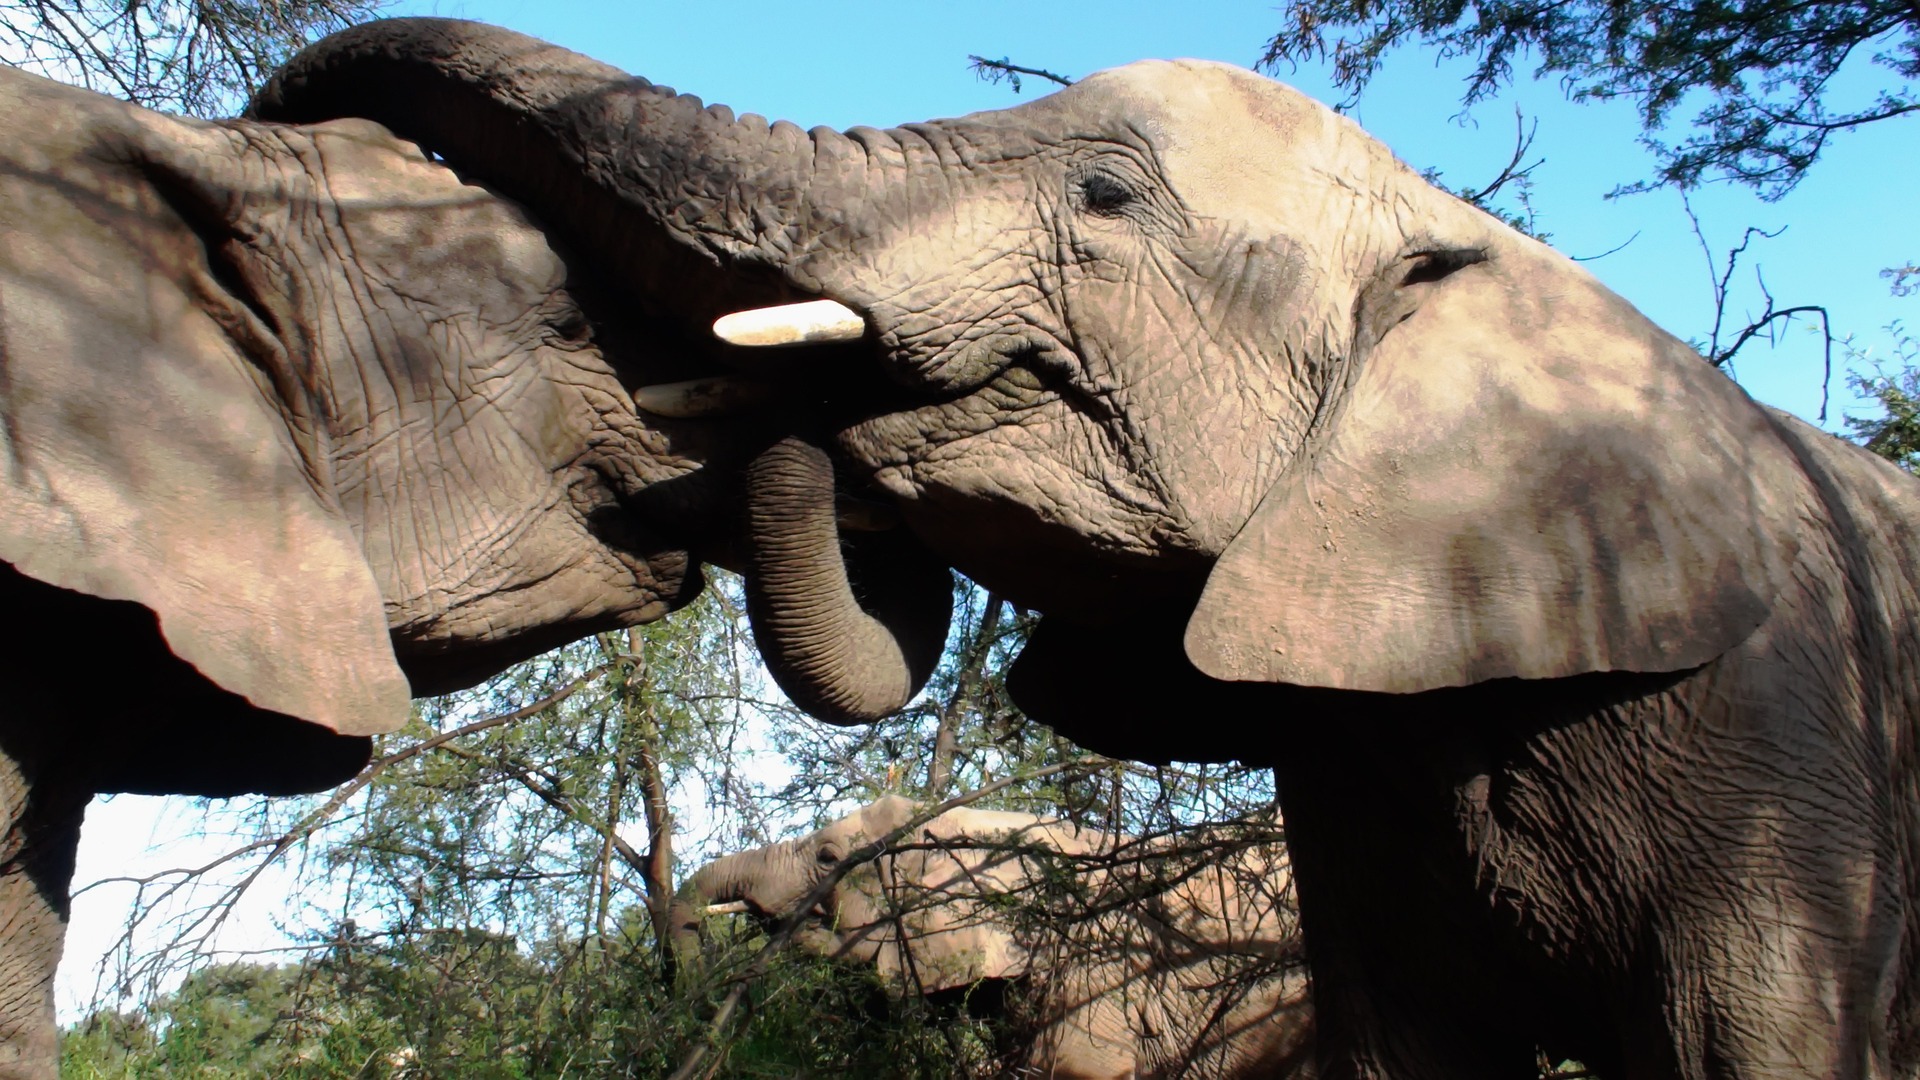 two elephants with intertwined trunks